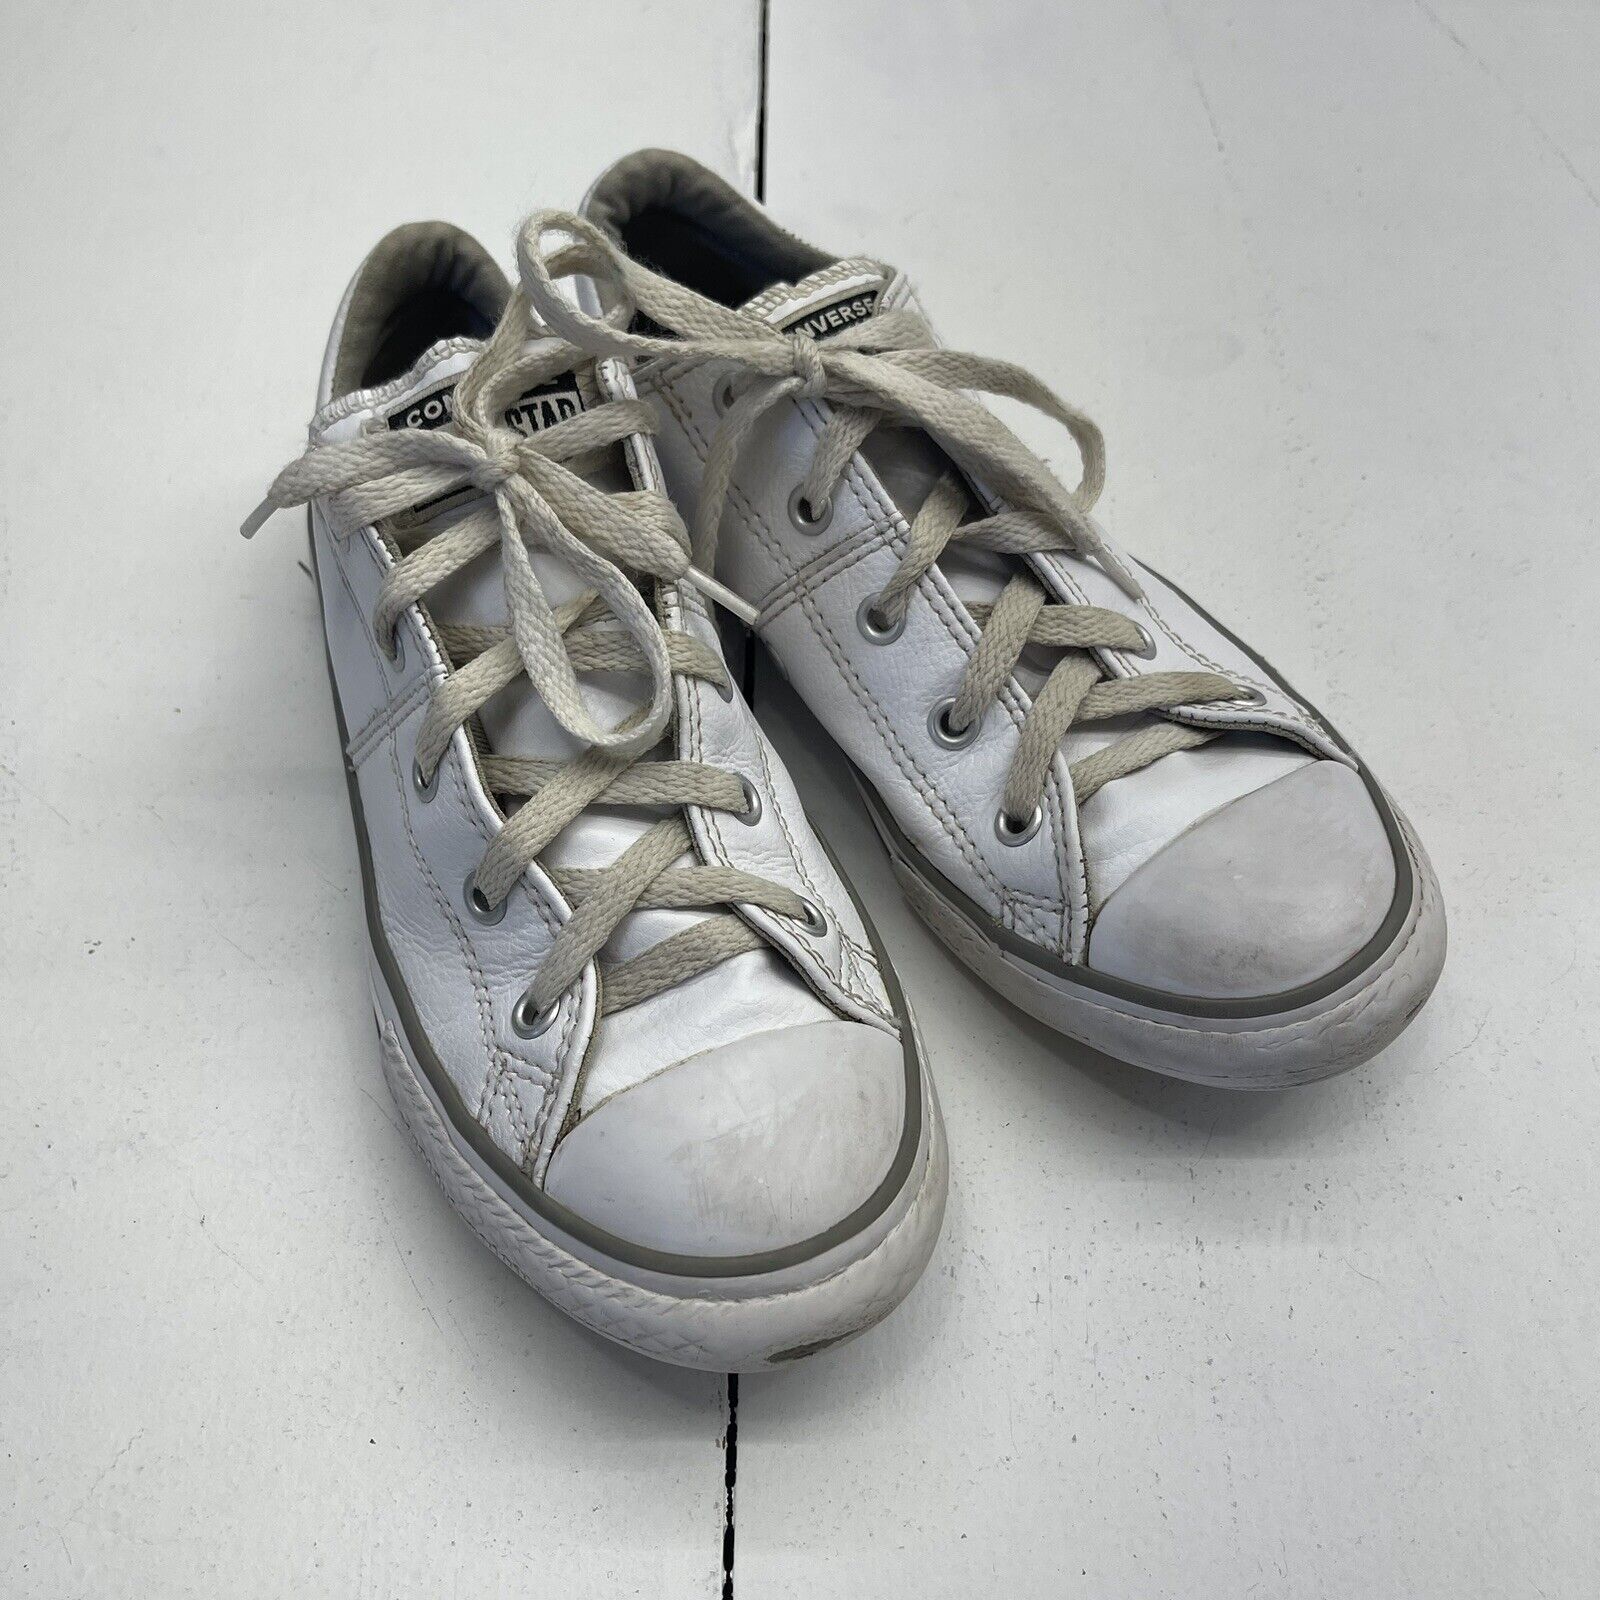 Converse Madison Ox White LeatherCasual Shoes Sneakers Kids Size 3 654220C*